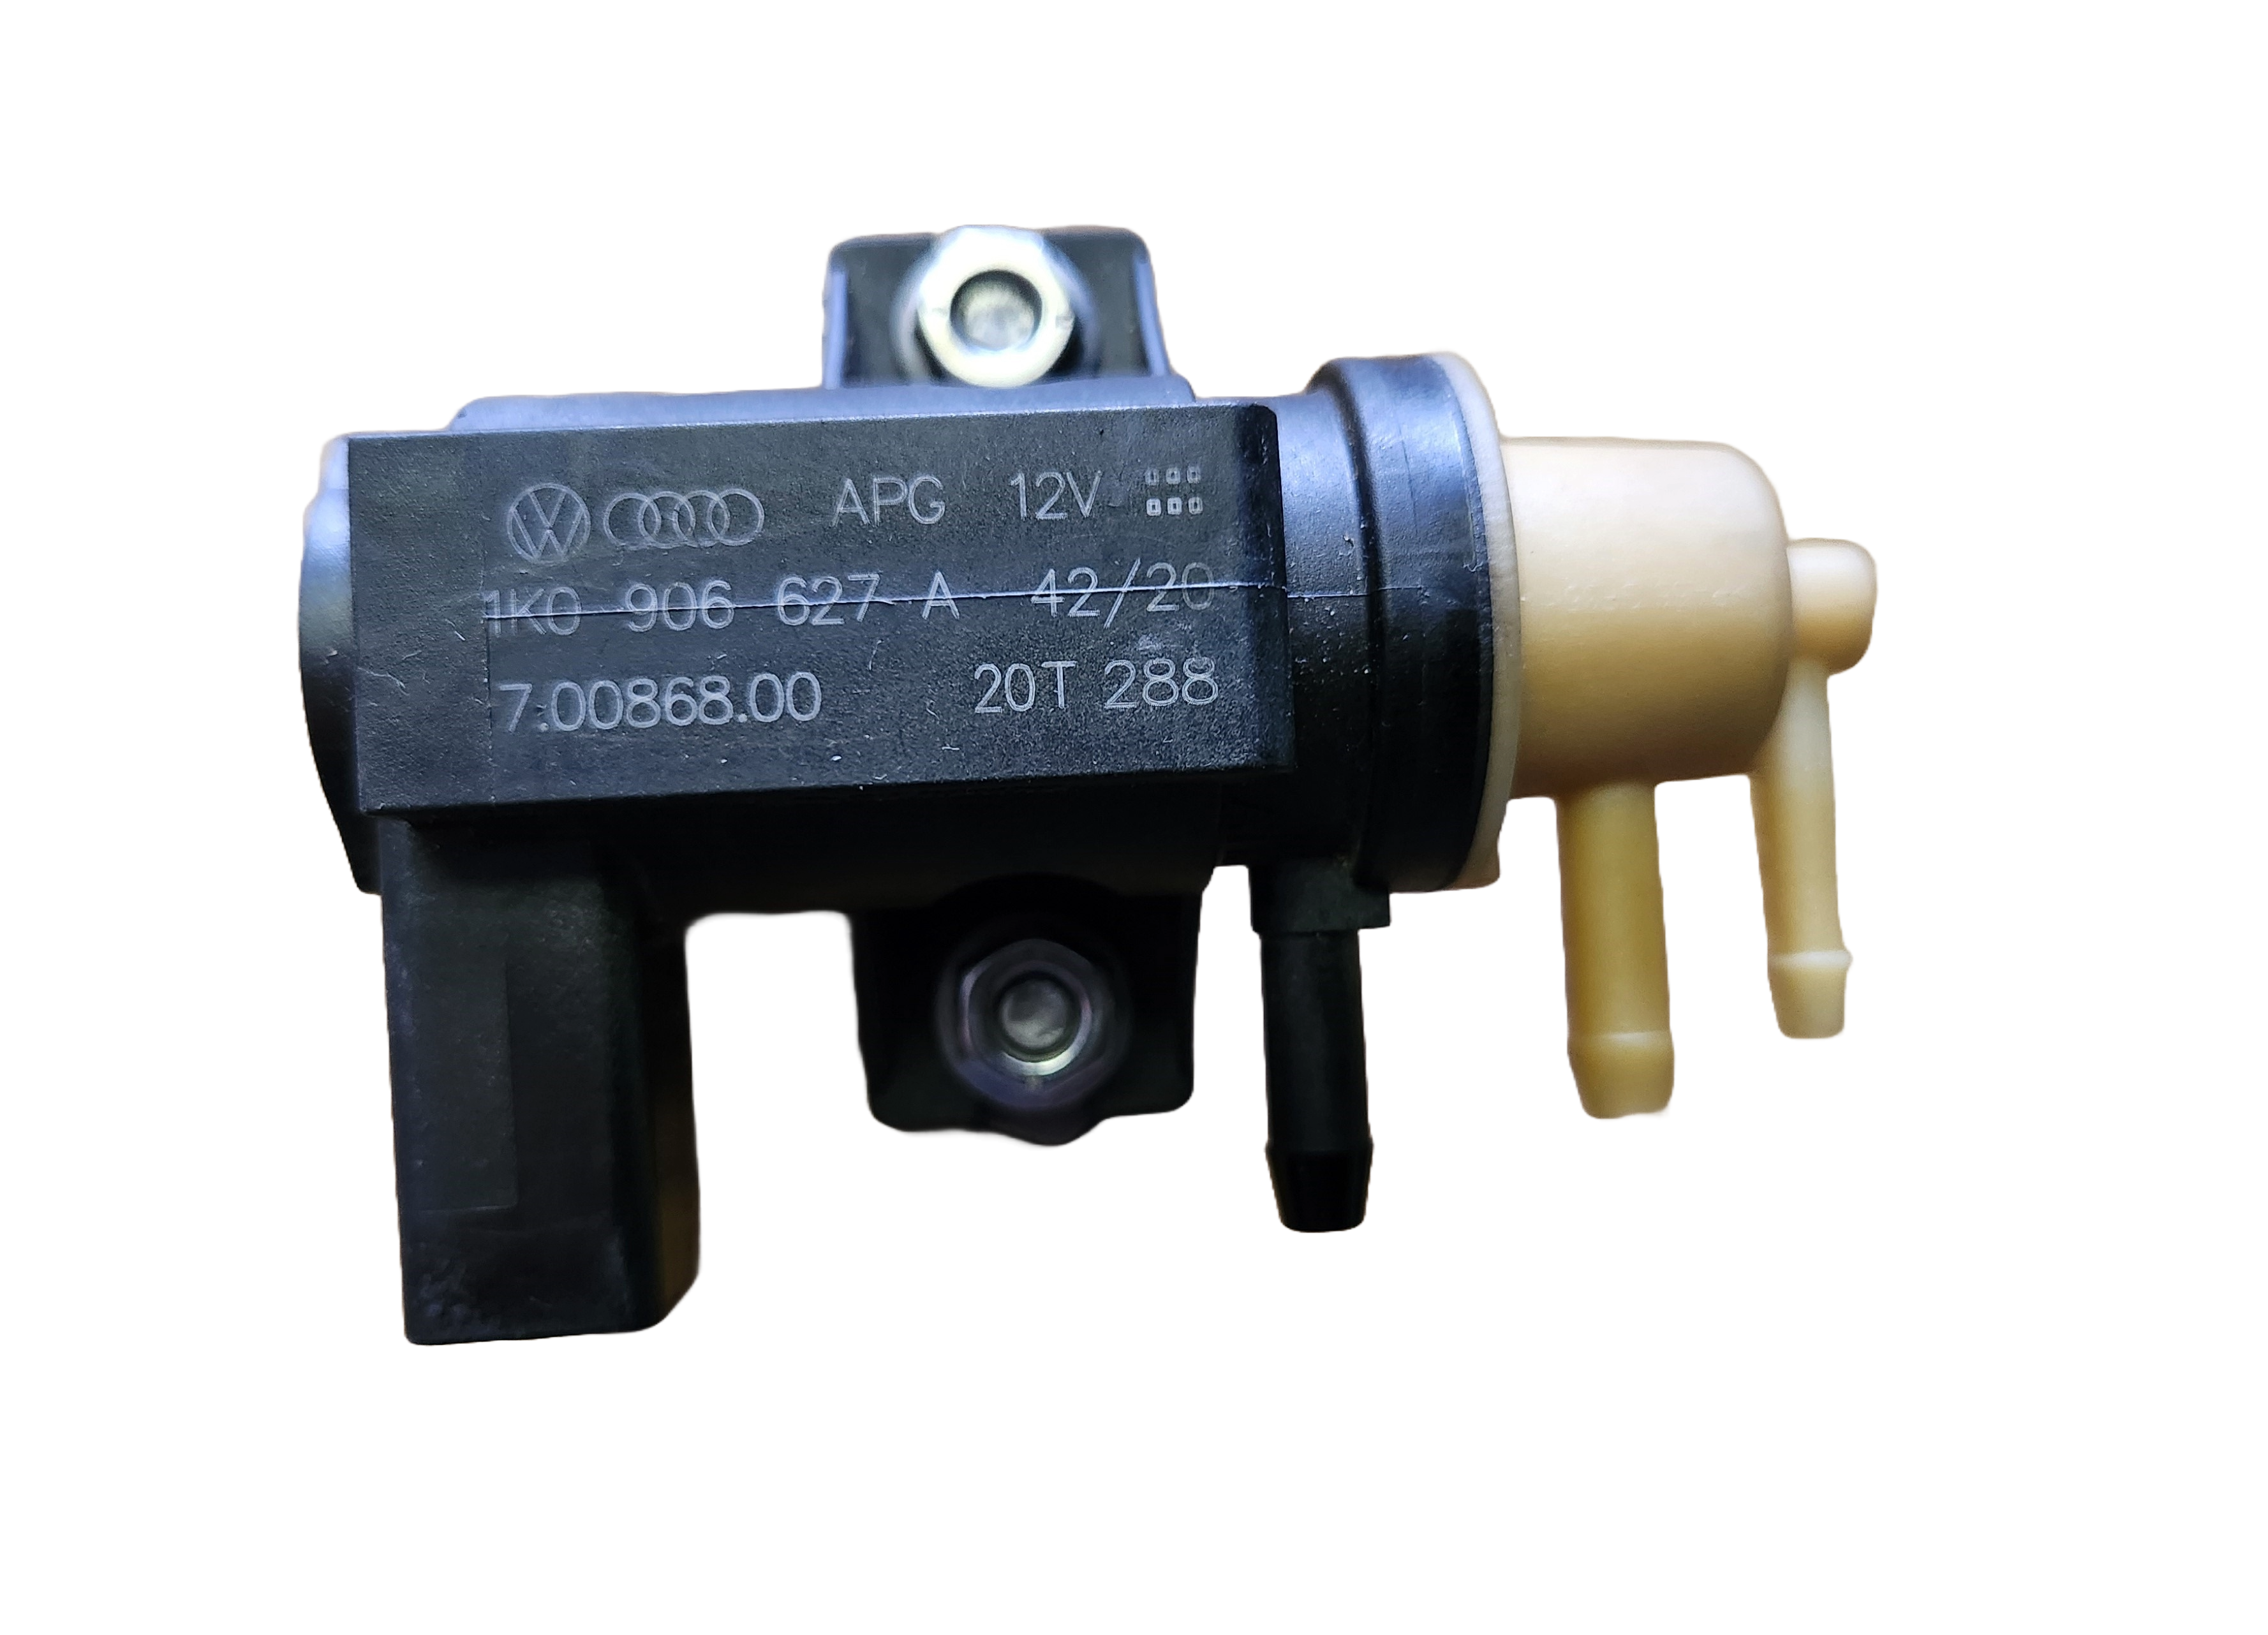 Turbo Boost Pressure Control Solenoid N75 Valve For VW/Audi/Seat 1K0906627A